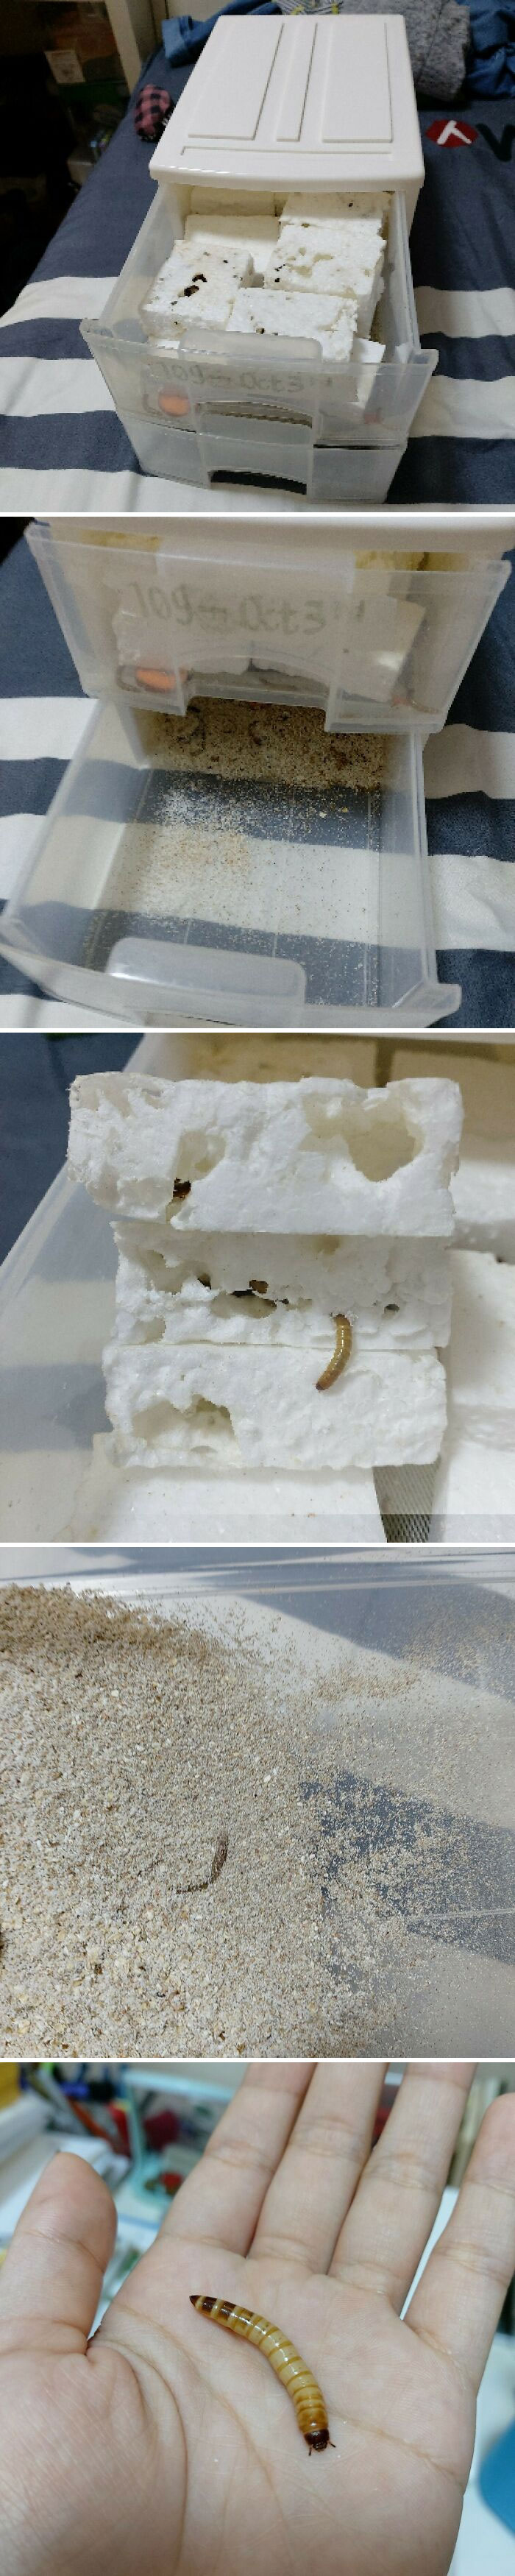 My Boyfriend Wrote A Paper On How Superworms And Mealworms Can Digest Styrofoam Into Biodegradable Waste At A Fast Rate. We Expanded It Into A Project At School This Year. This Is A Farm That I Started A Week Ago. It's Simple And Low Maintenance. Please Try It Out!